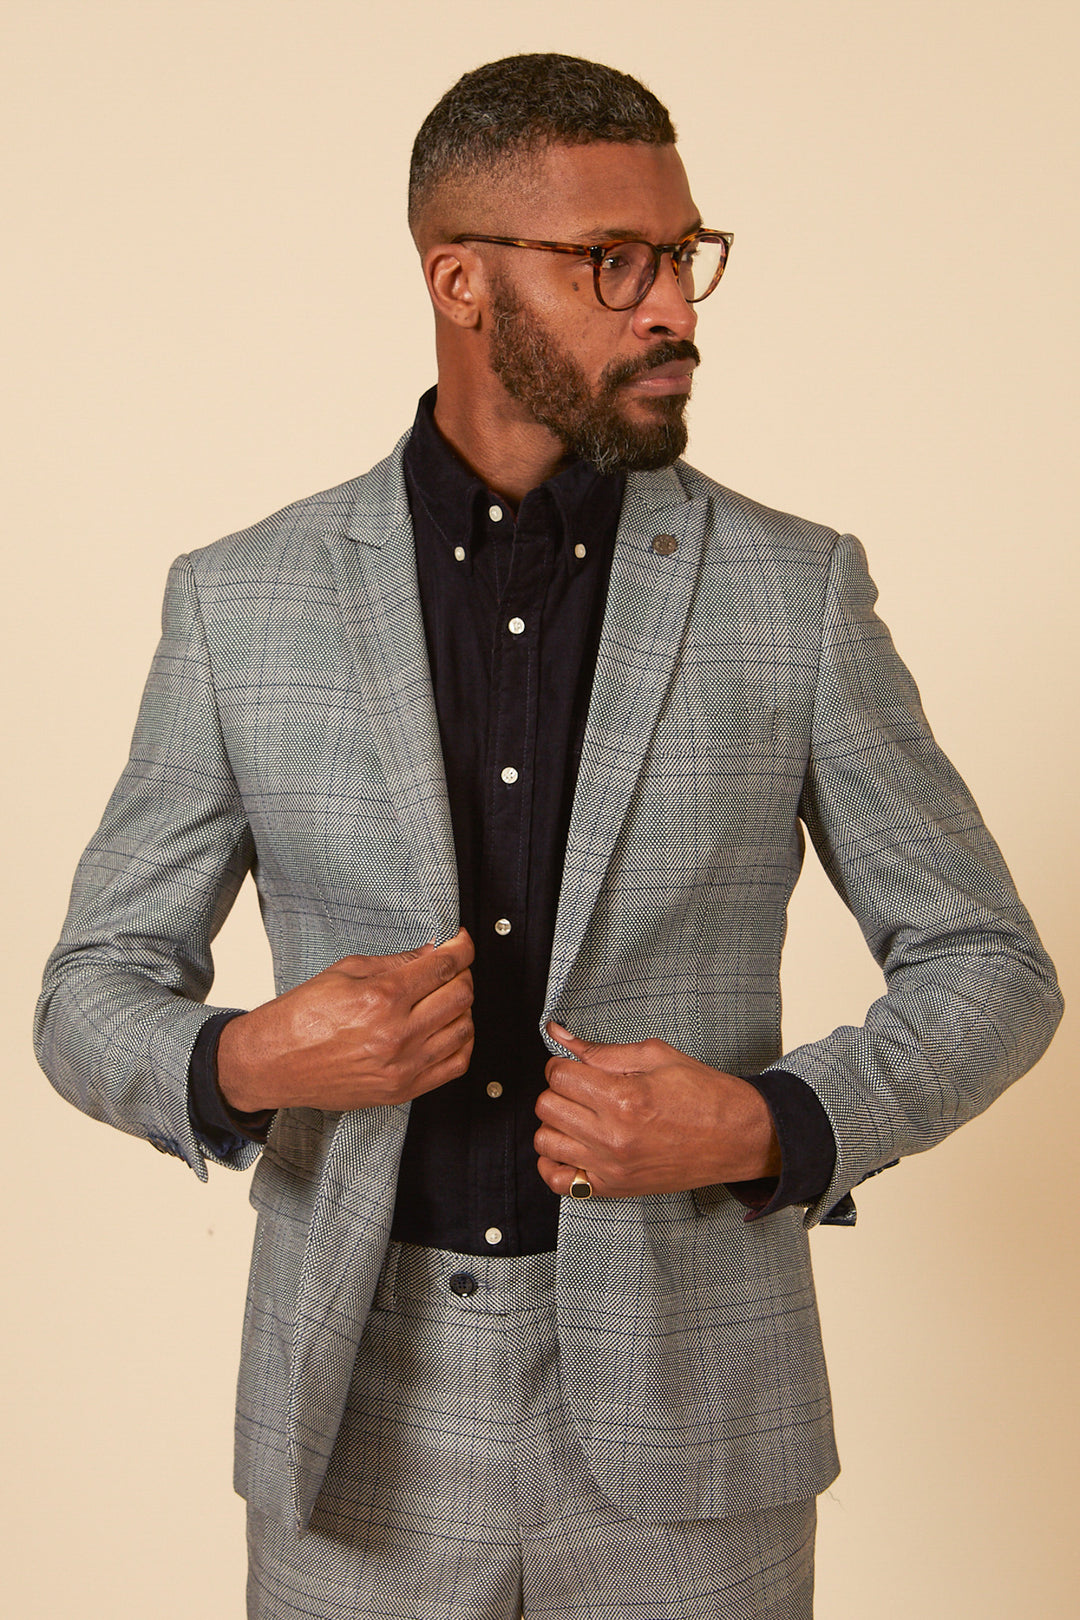 JERRY - Grey Check Two Piece Suit